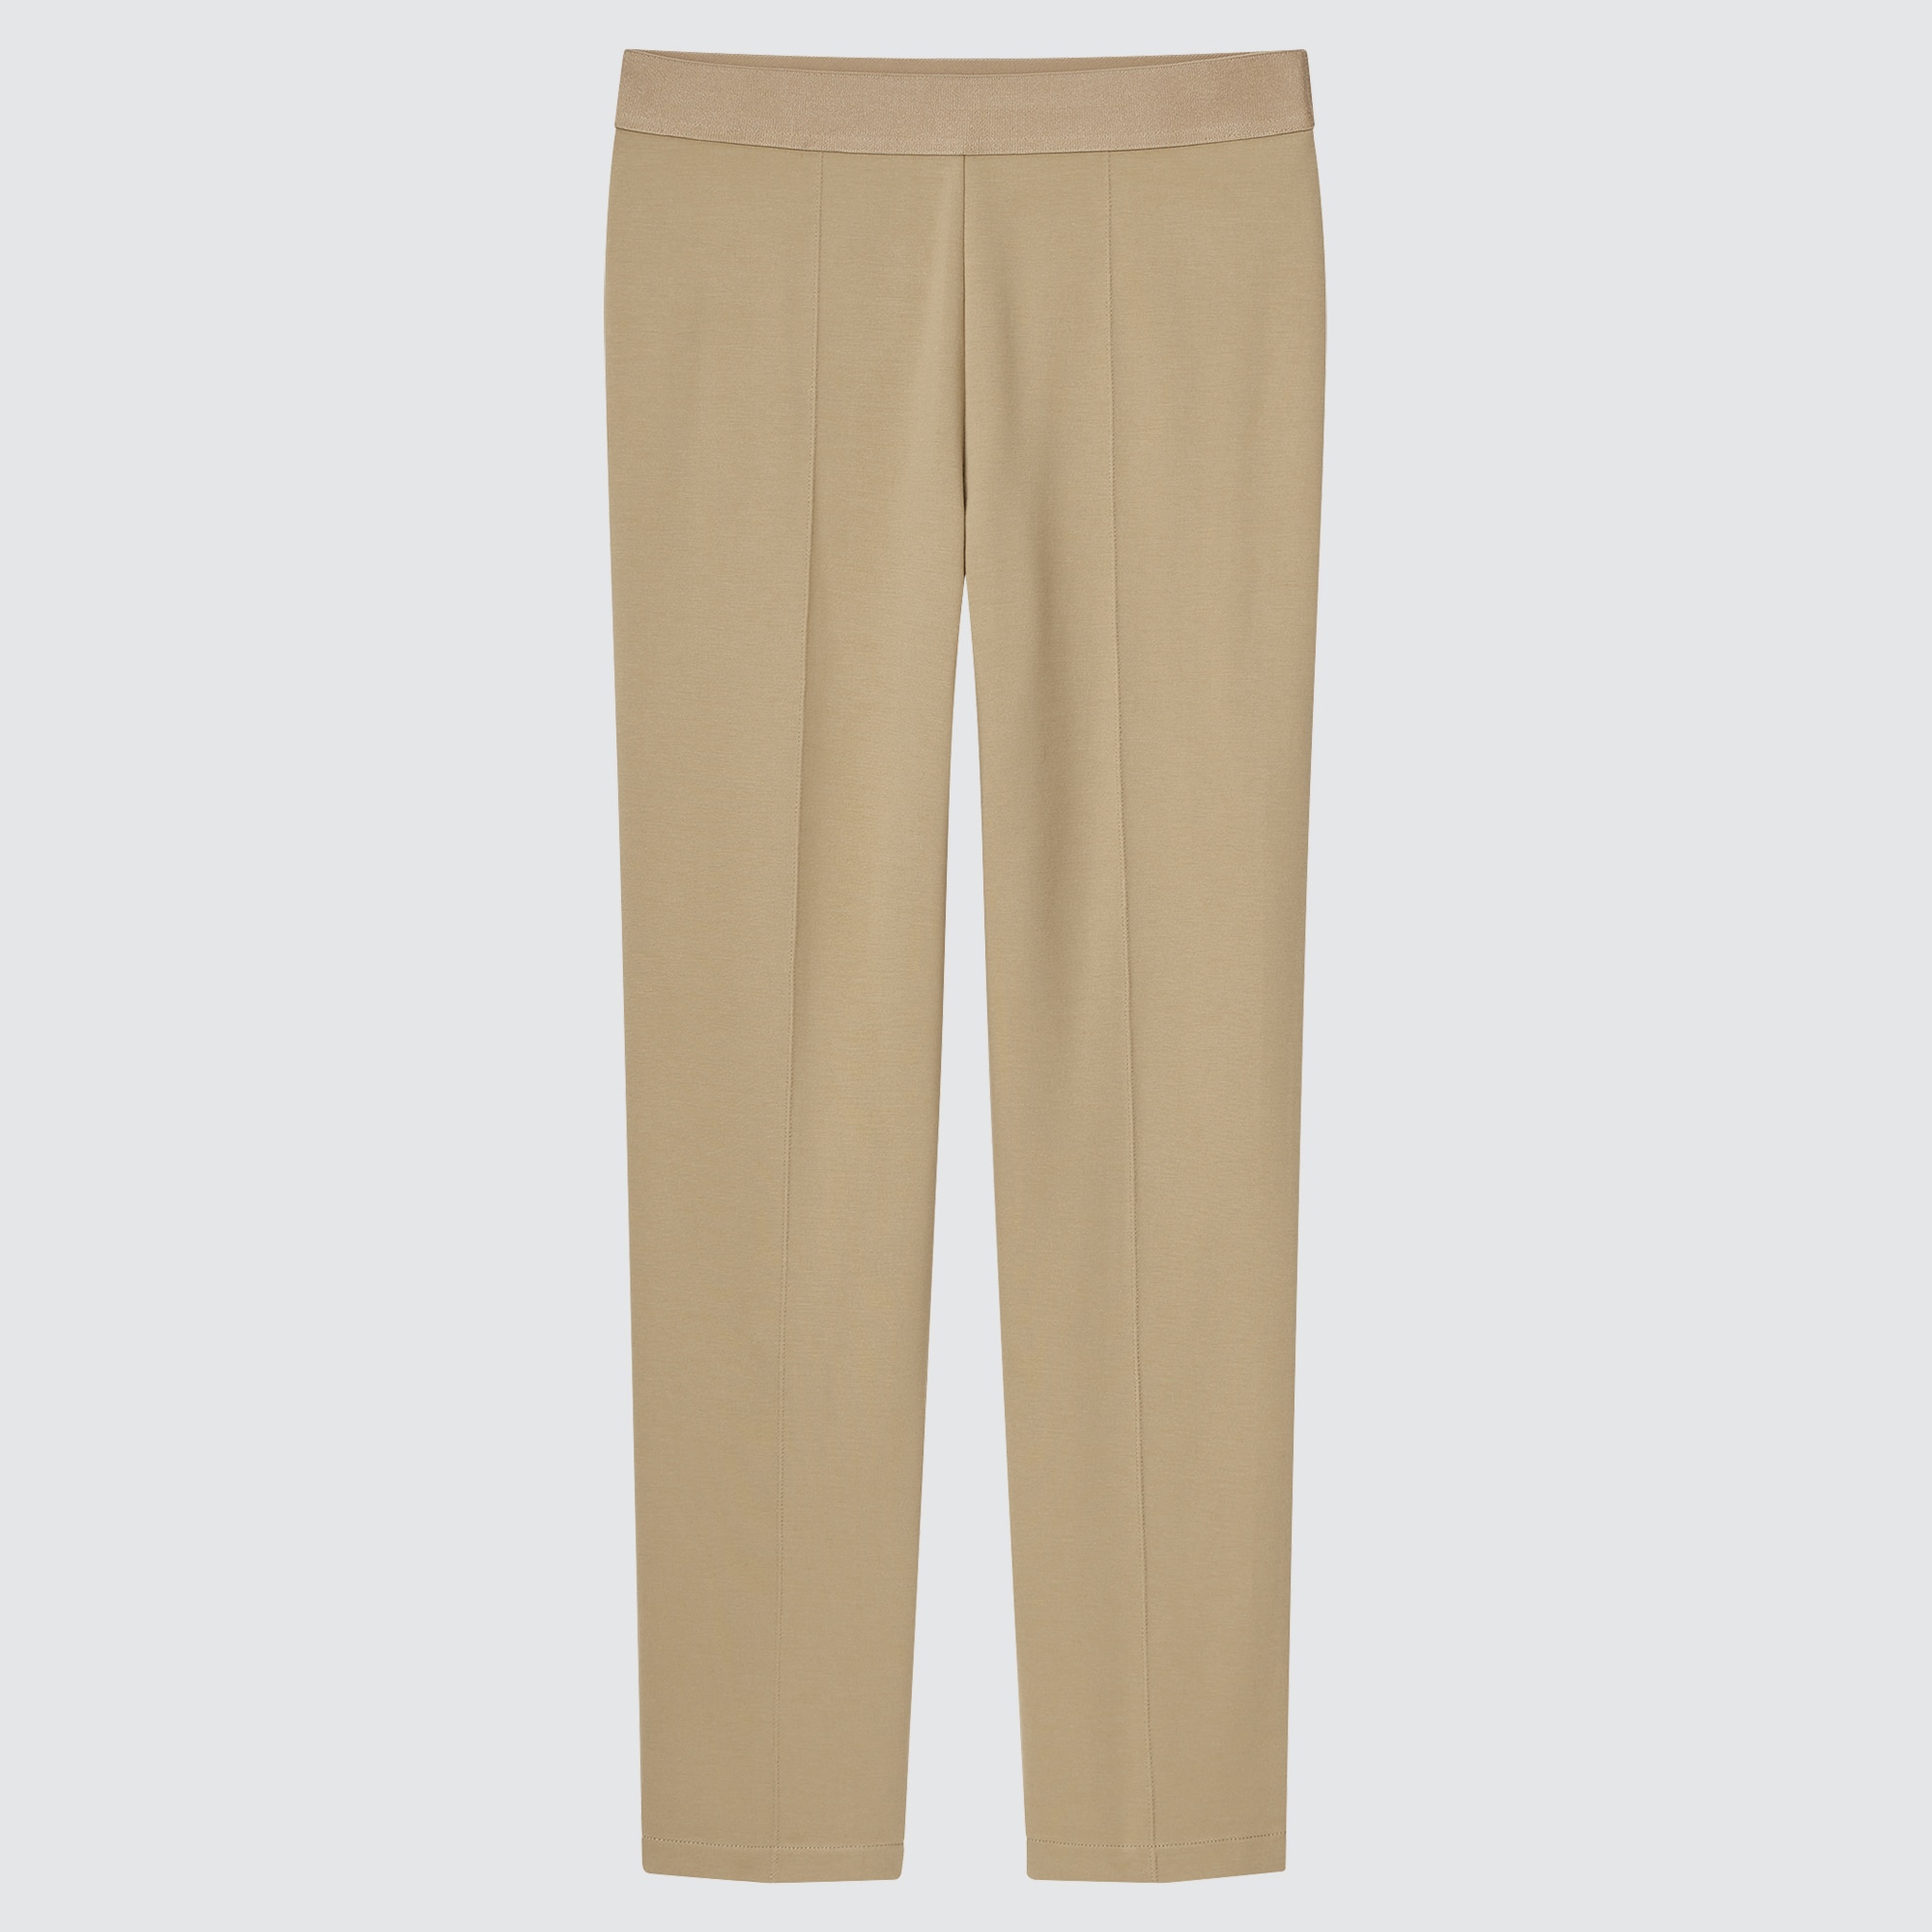 UNIQLO updates its EZY Ankle Pants featuring 2Way Stretch Fabric